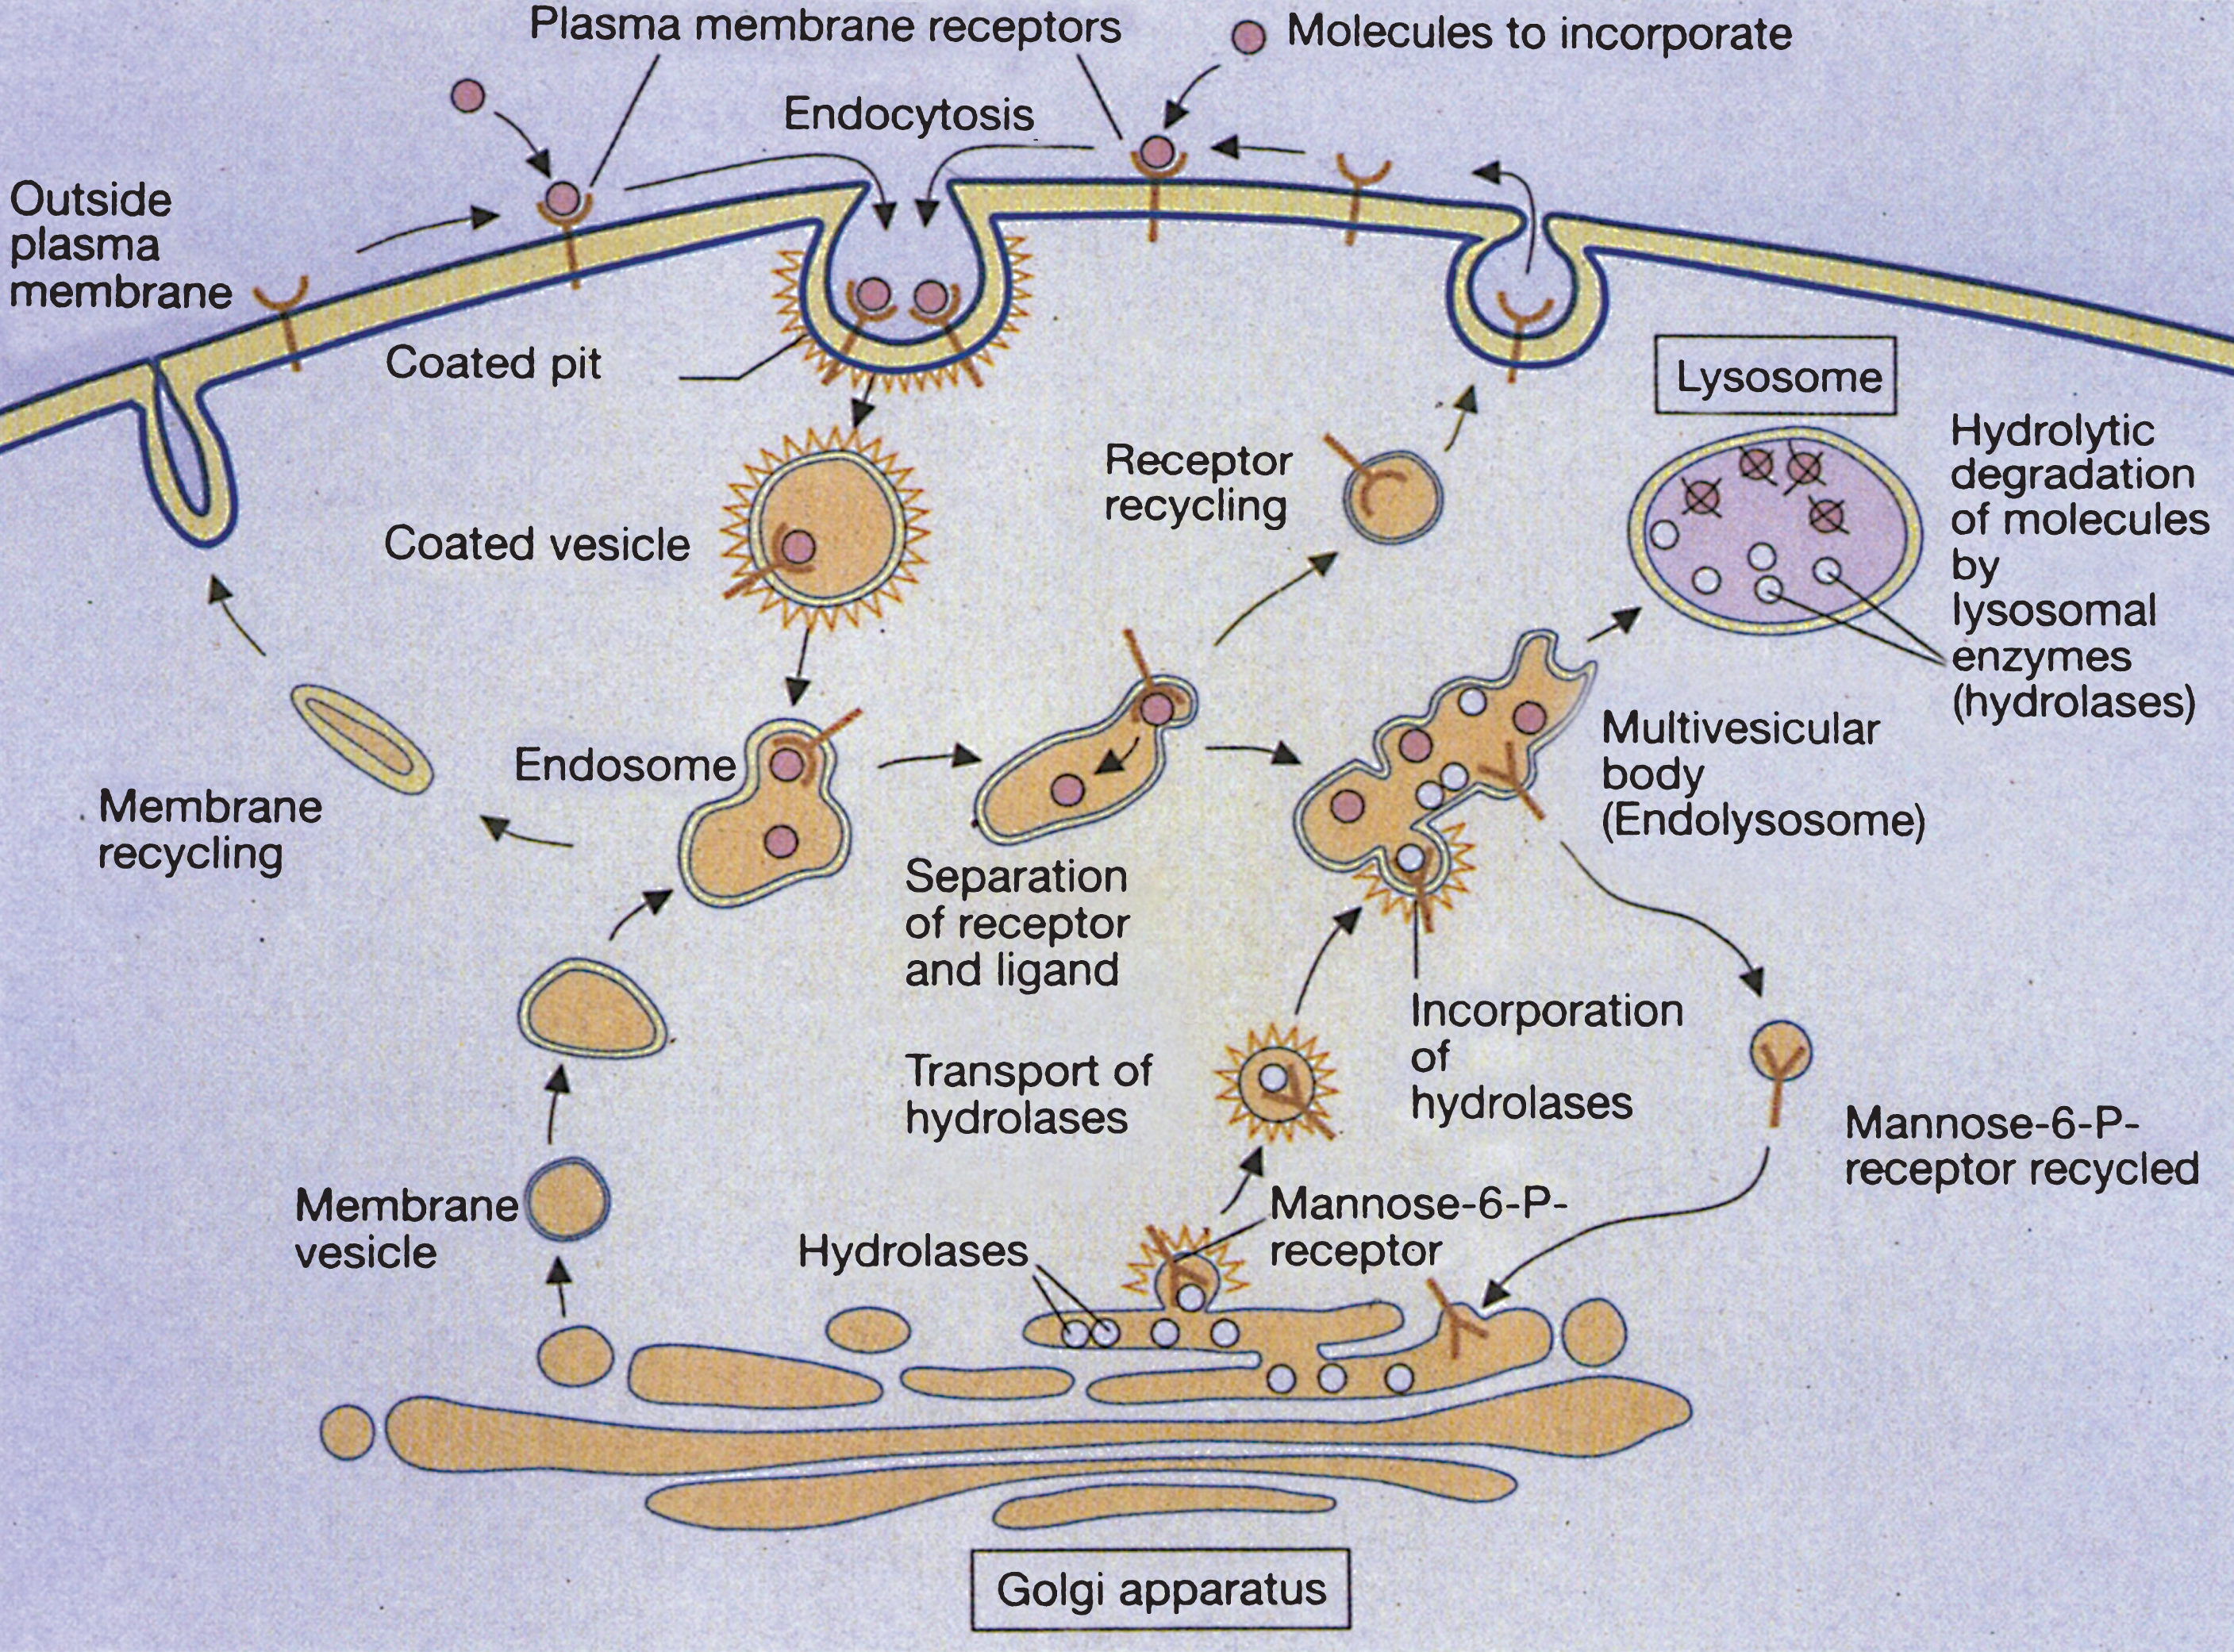 Receptor-mediated and lysosome formation. (Courtesy of Dr. Eberhard Passarge and Thieme Medical Publishers.).